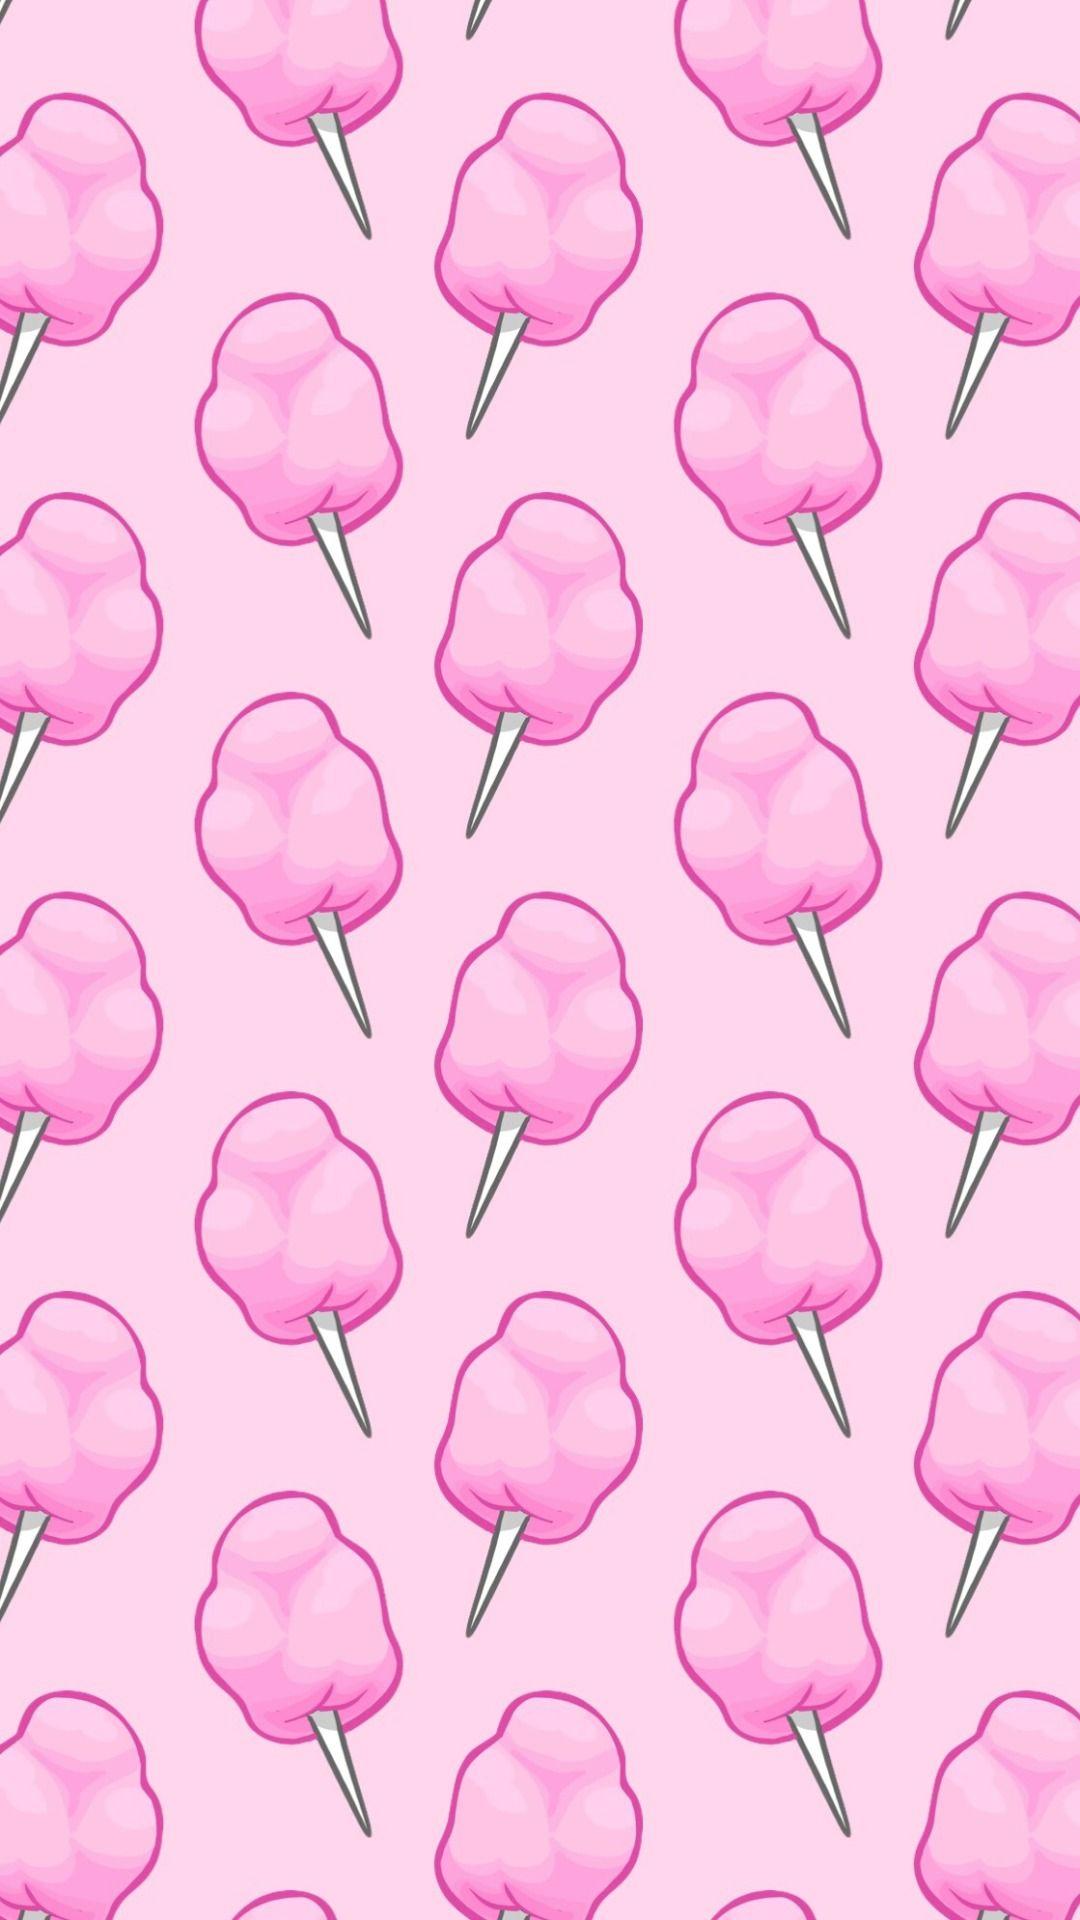  Cute  Cotton Candy  Wallpapers  Top Free Cute  Cotton Candy  